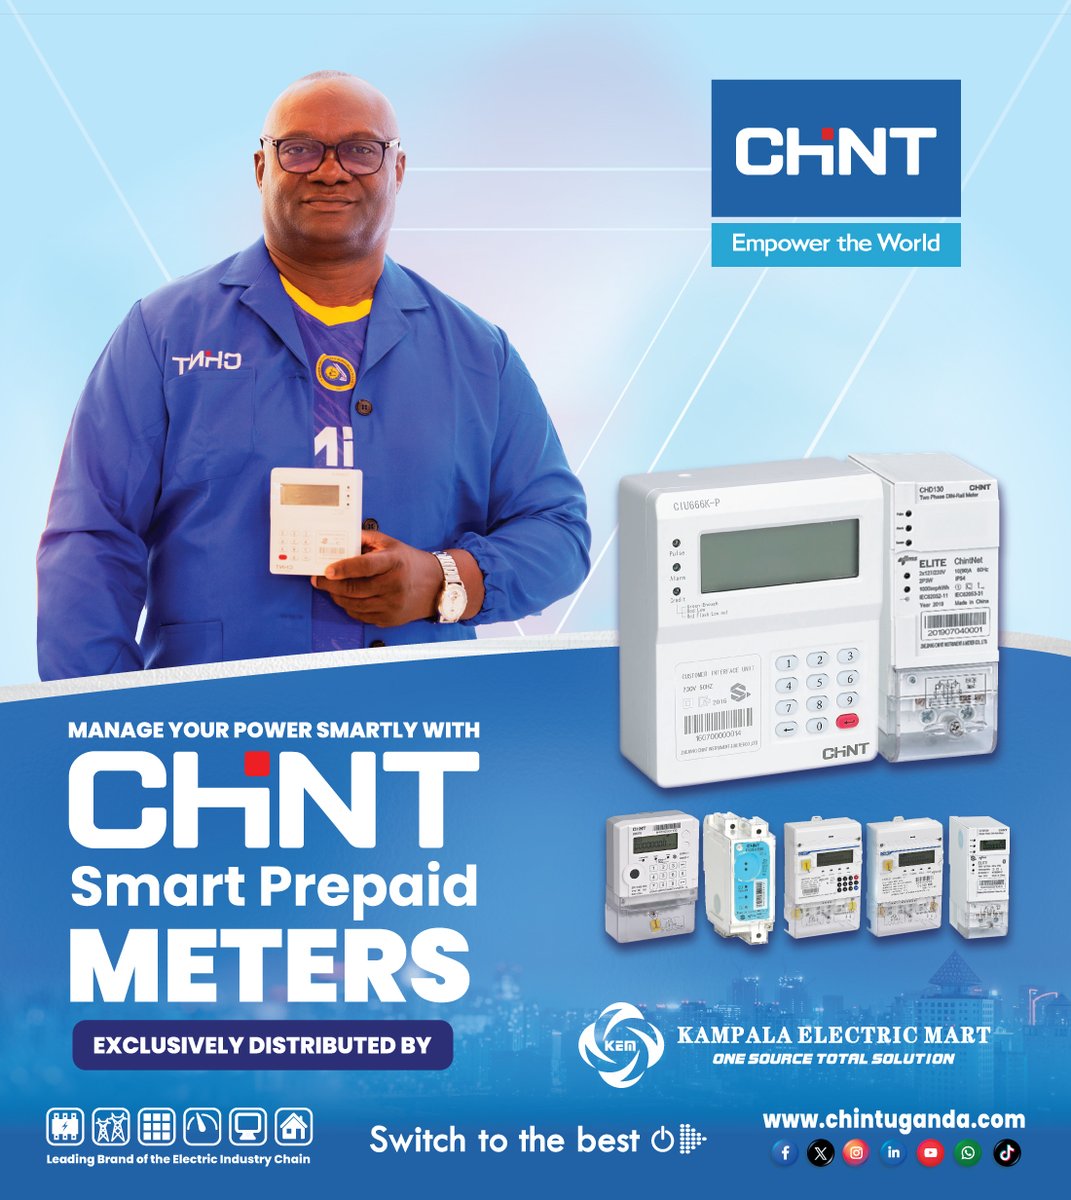 MANAGE YOUR ELECTRICITY BILLS SMARTLY WITH THE CHINT SMART PREPAID METER.
1. Made By Chint Meter and Electrical Uganda C0., Ltd
2. Exclusively Distributed by Kampala Electric Mart Ltd
#electricmeters #electricmeters #powermeters #powermeters #prepaidmeters
#chintuganda